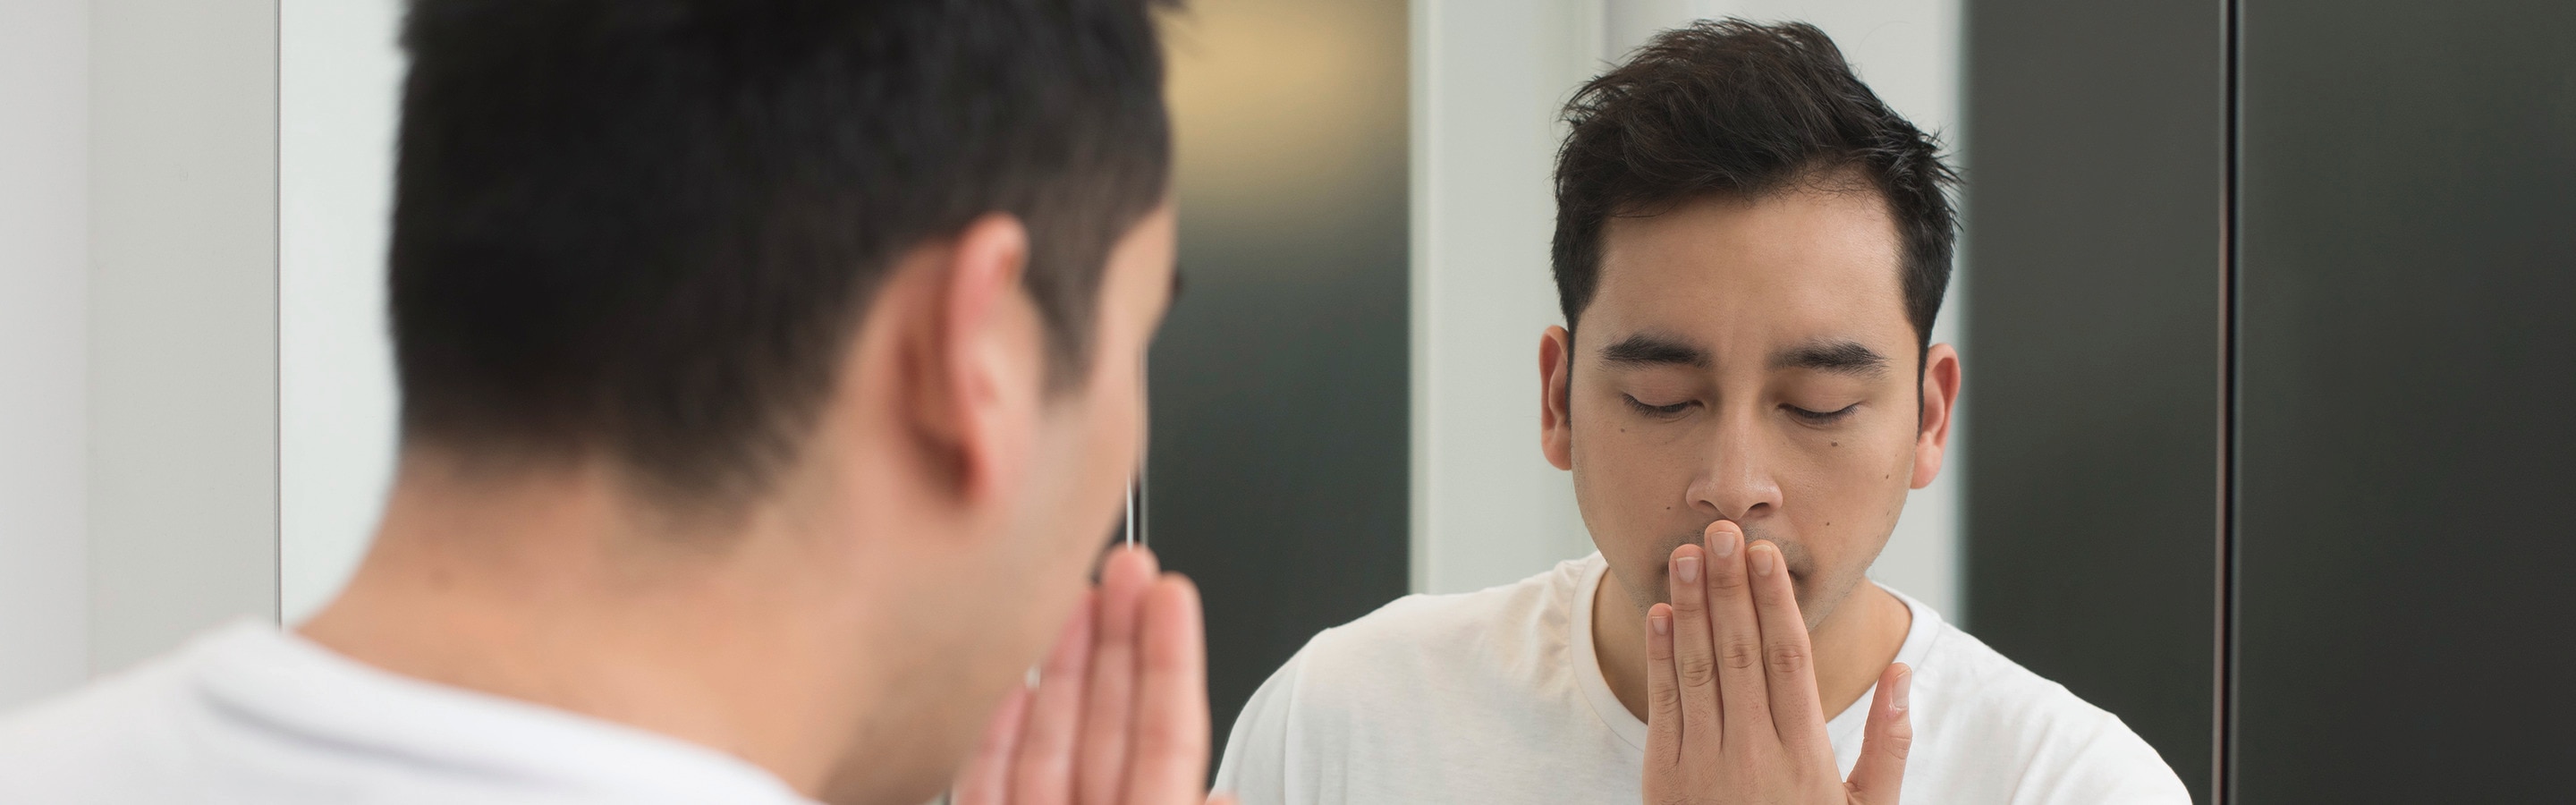 Five myths about bad breath